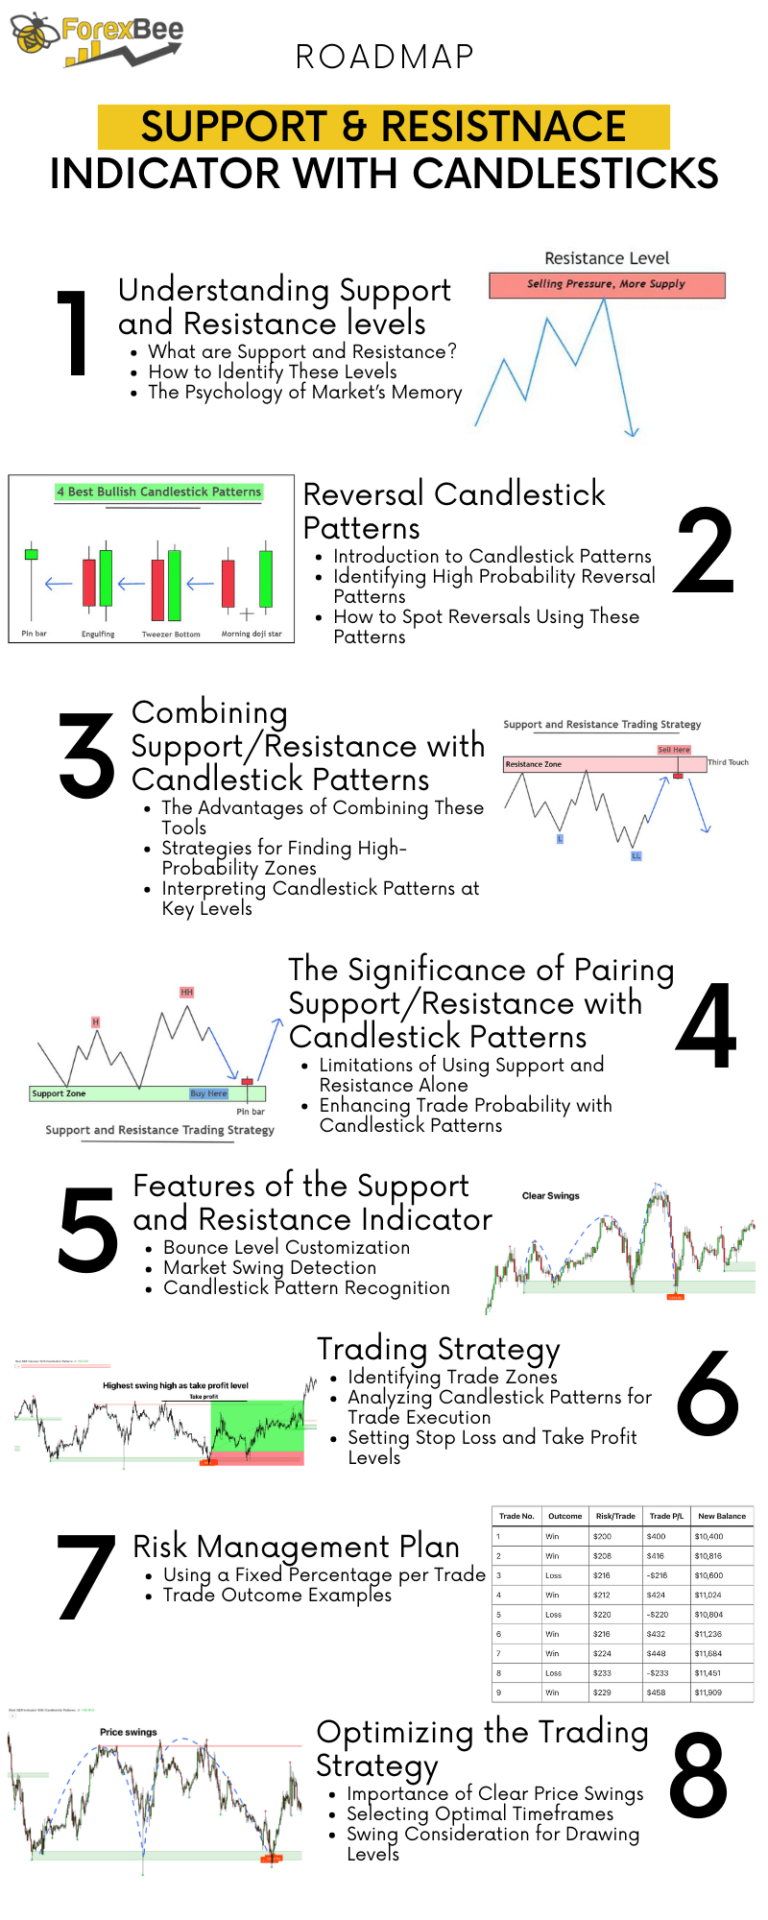 Support & Resistnace indicator with candlesticks